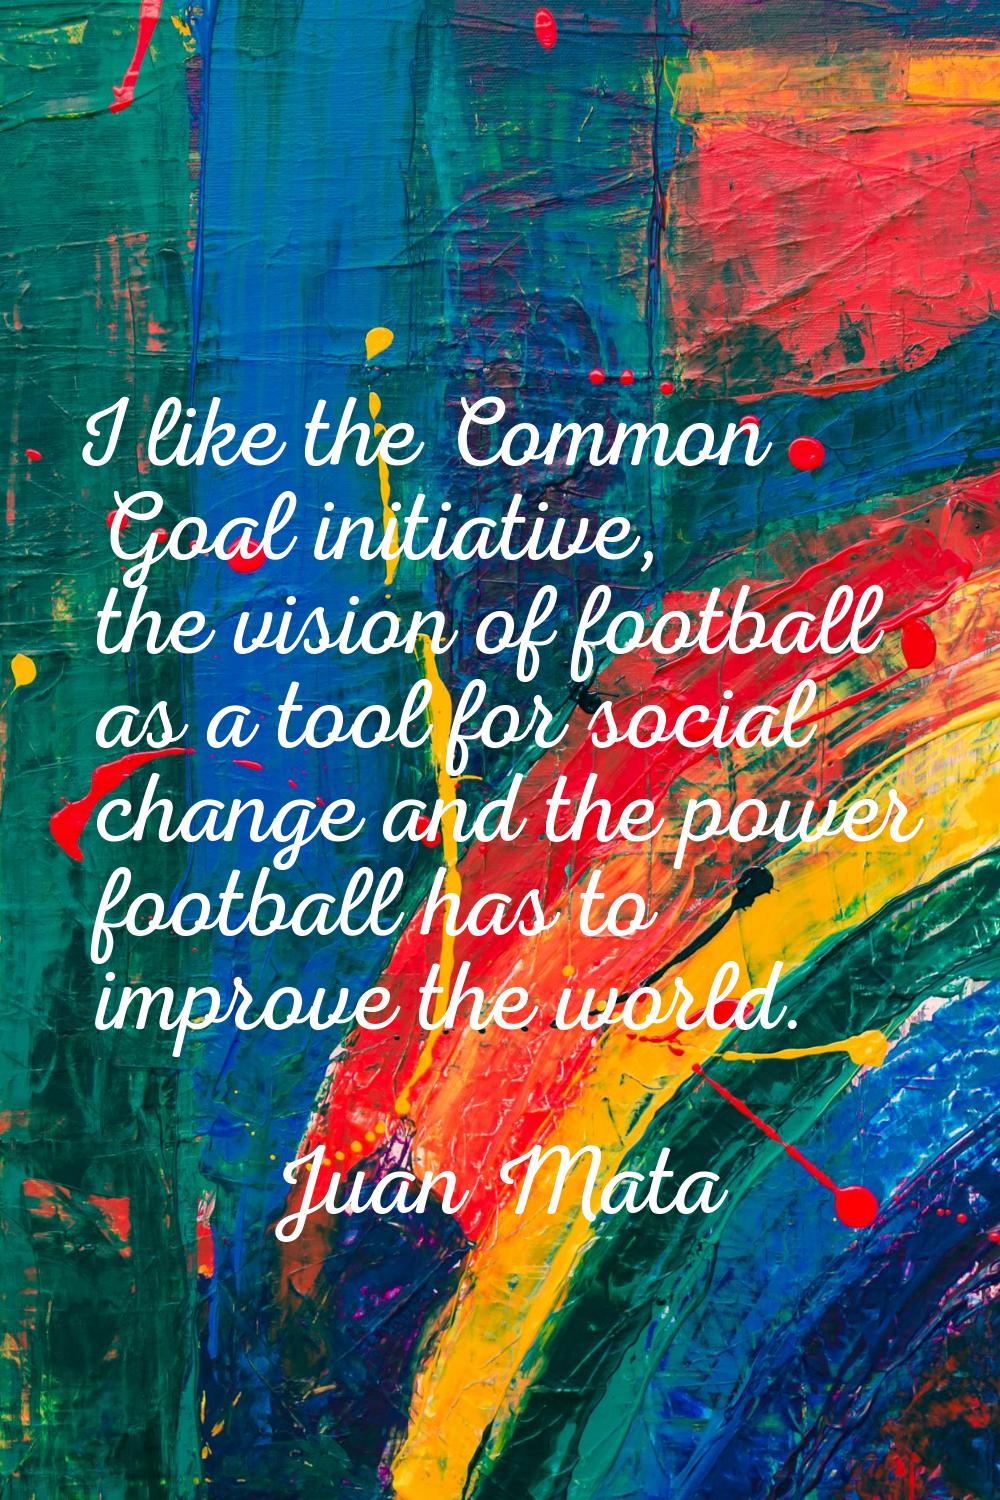 I like the Common Goal initiative, the vision of football as a tool for social change and the power